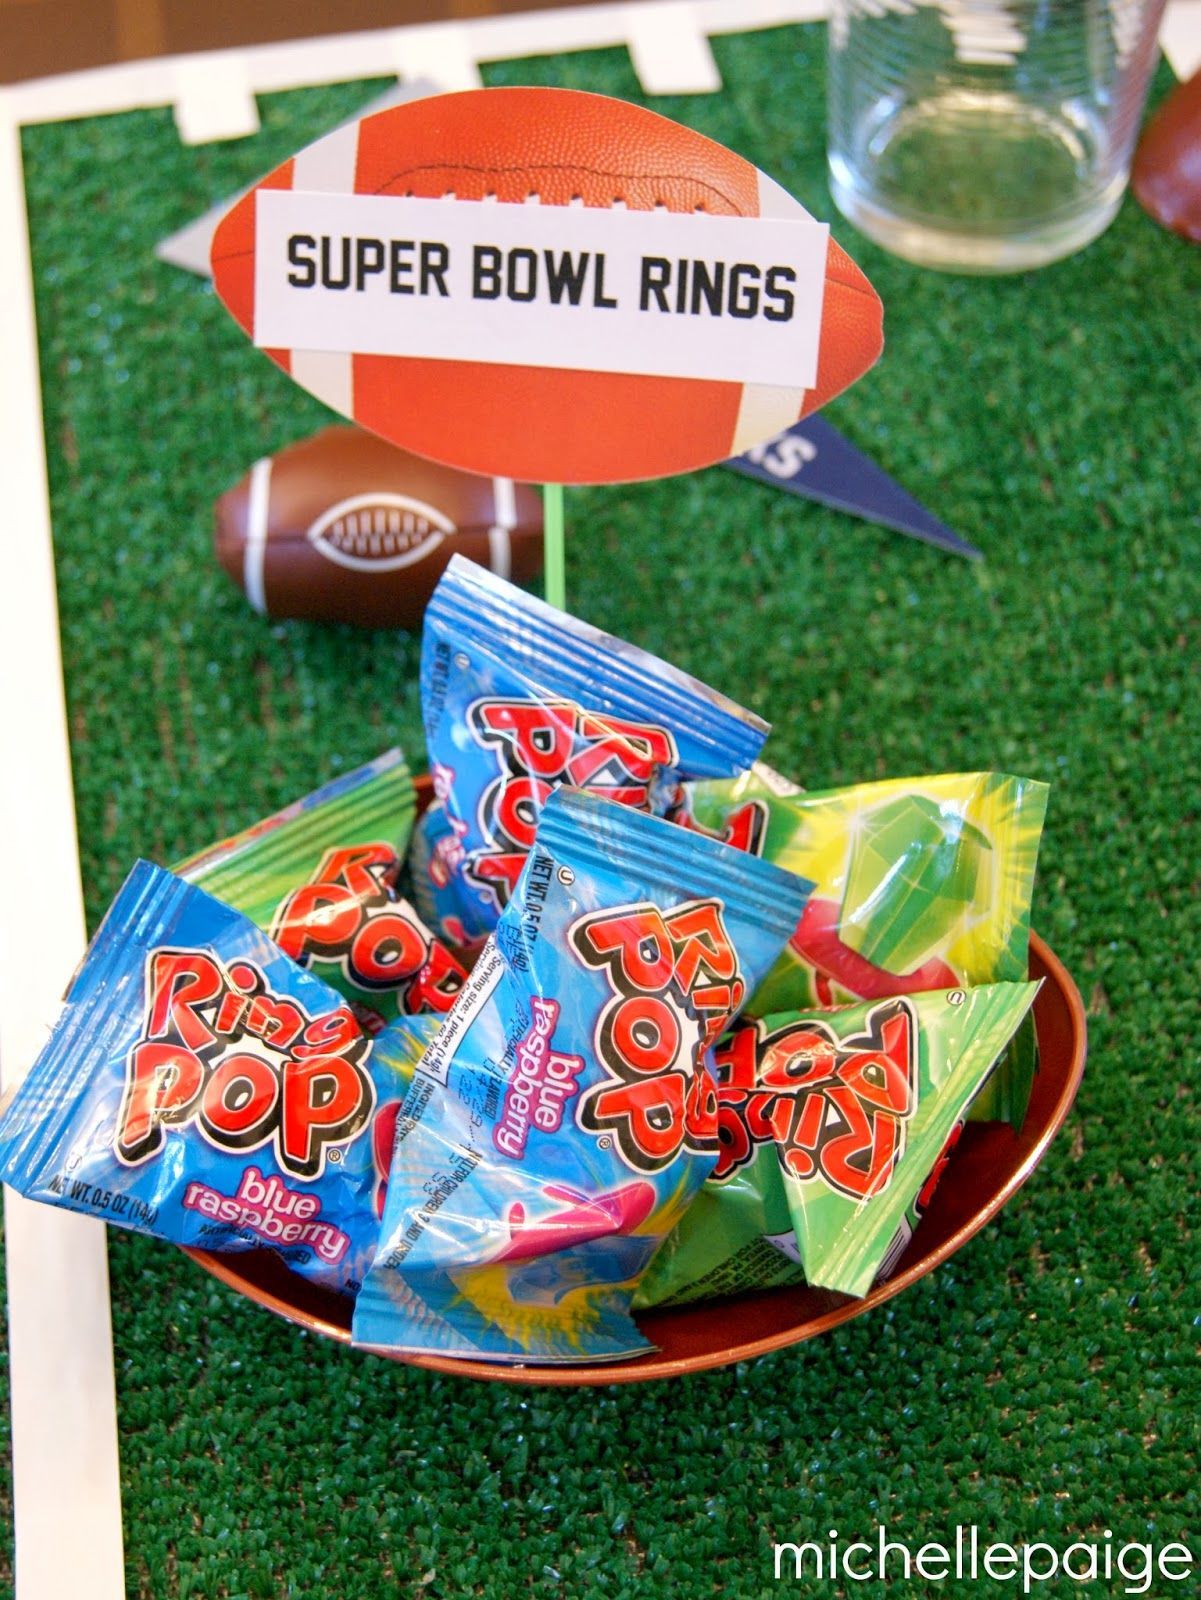 cute favor idea for football or super bowl party….. Birthday party ideas for Logan